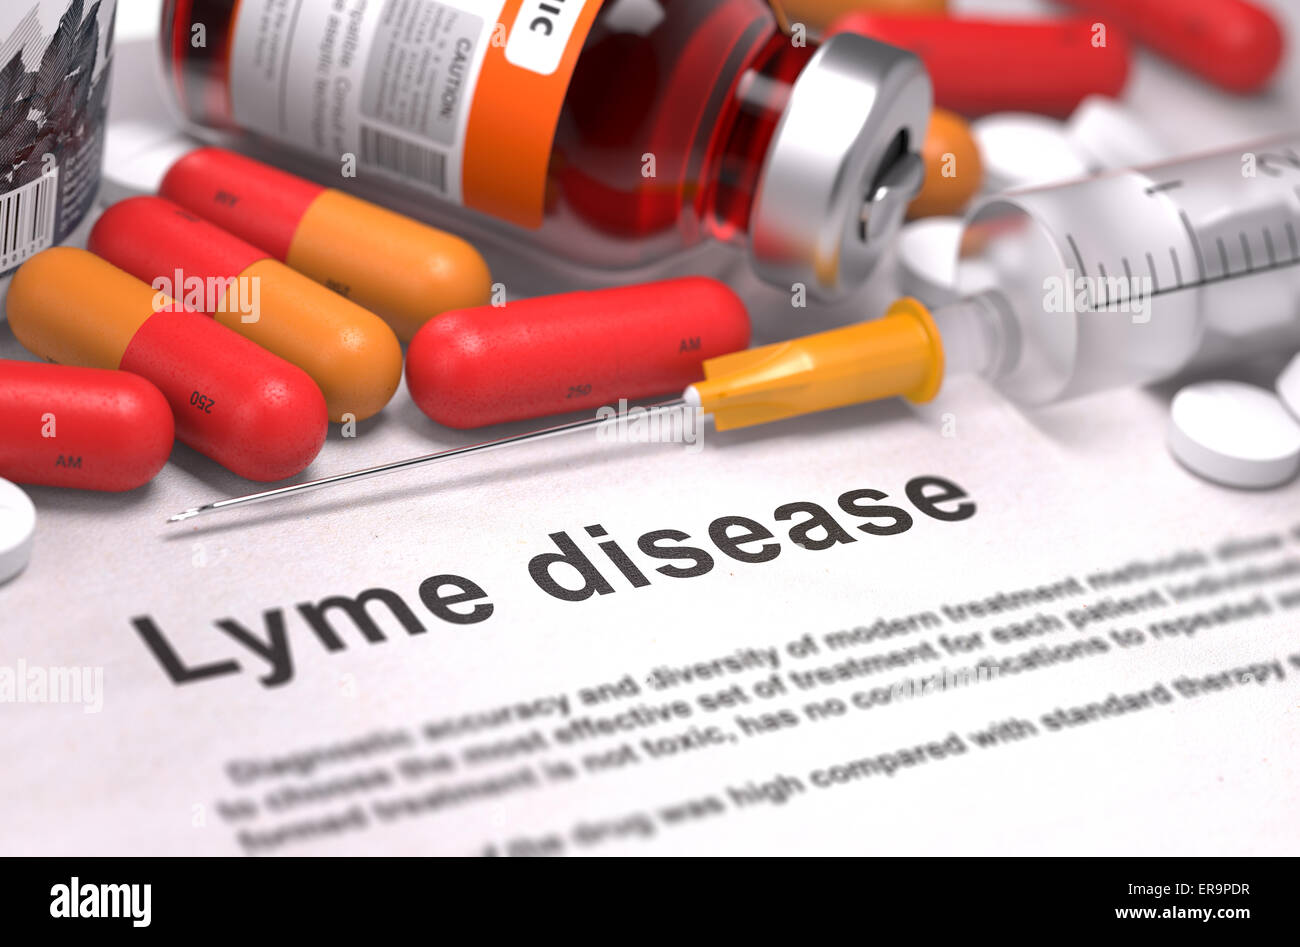 Diagnosis - Lyme Disease. Medical Report with Composition of Medicaments - Red Pills, Injections and Syringe. Selective Focus. Stock Photo